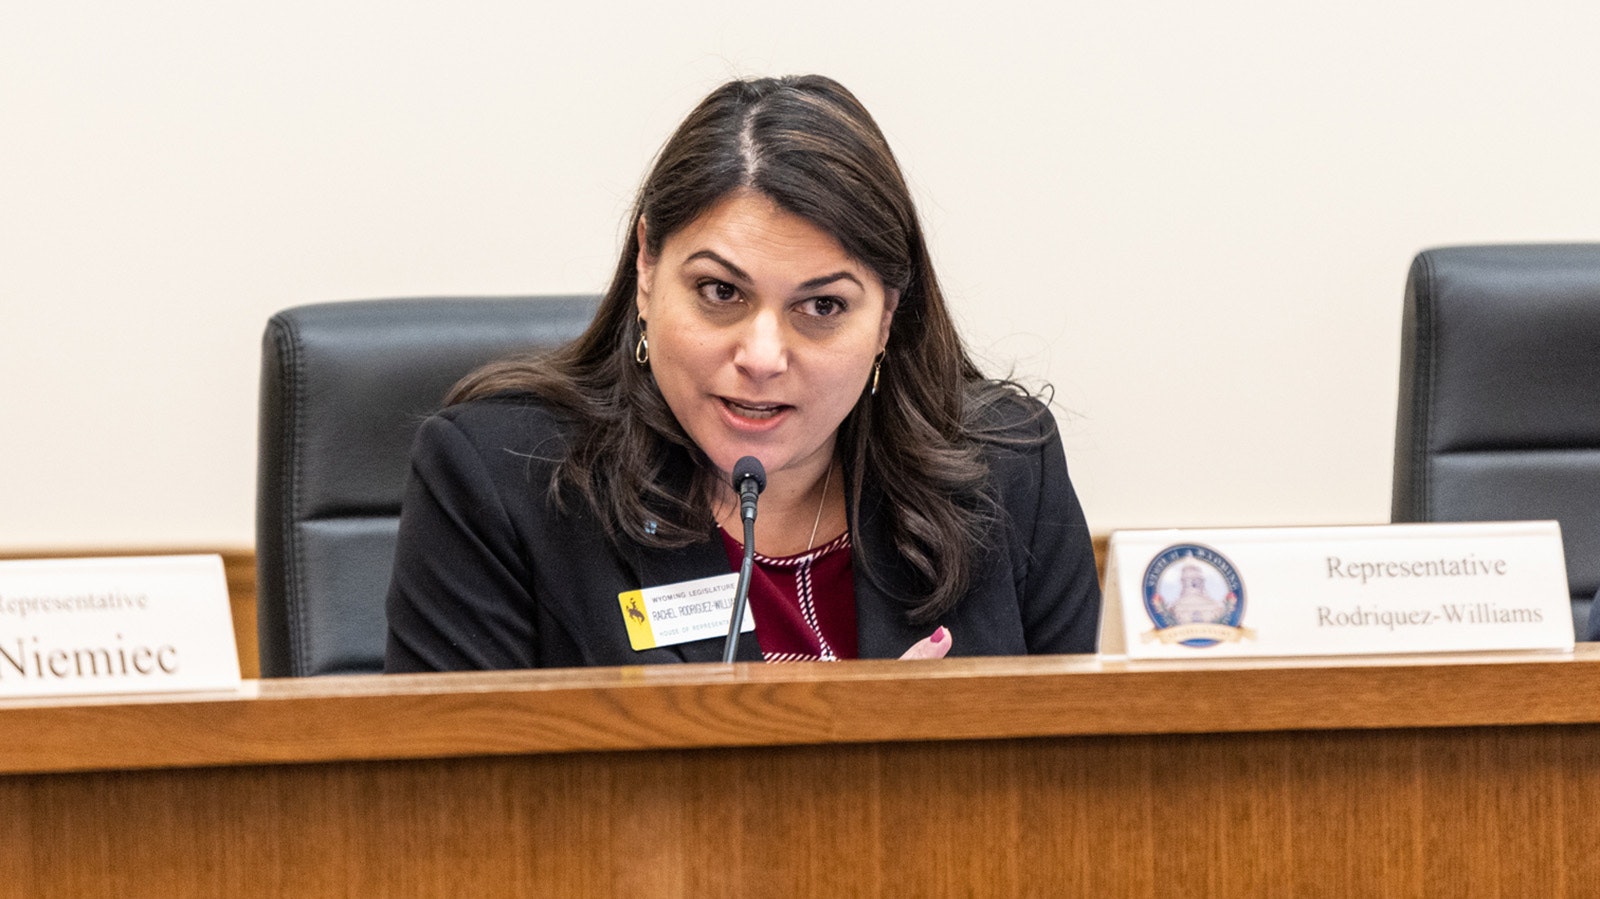 State Rep. Rachel Rodriguez-Williams, R-Cody, responded to Rep. Karlee Provenza’s weekend post, saying she “should be held accountable” for “condoning violence.”